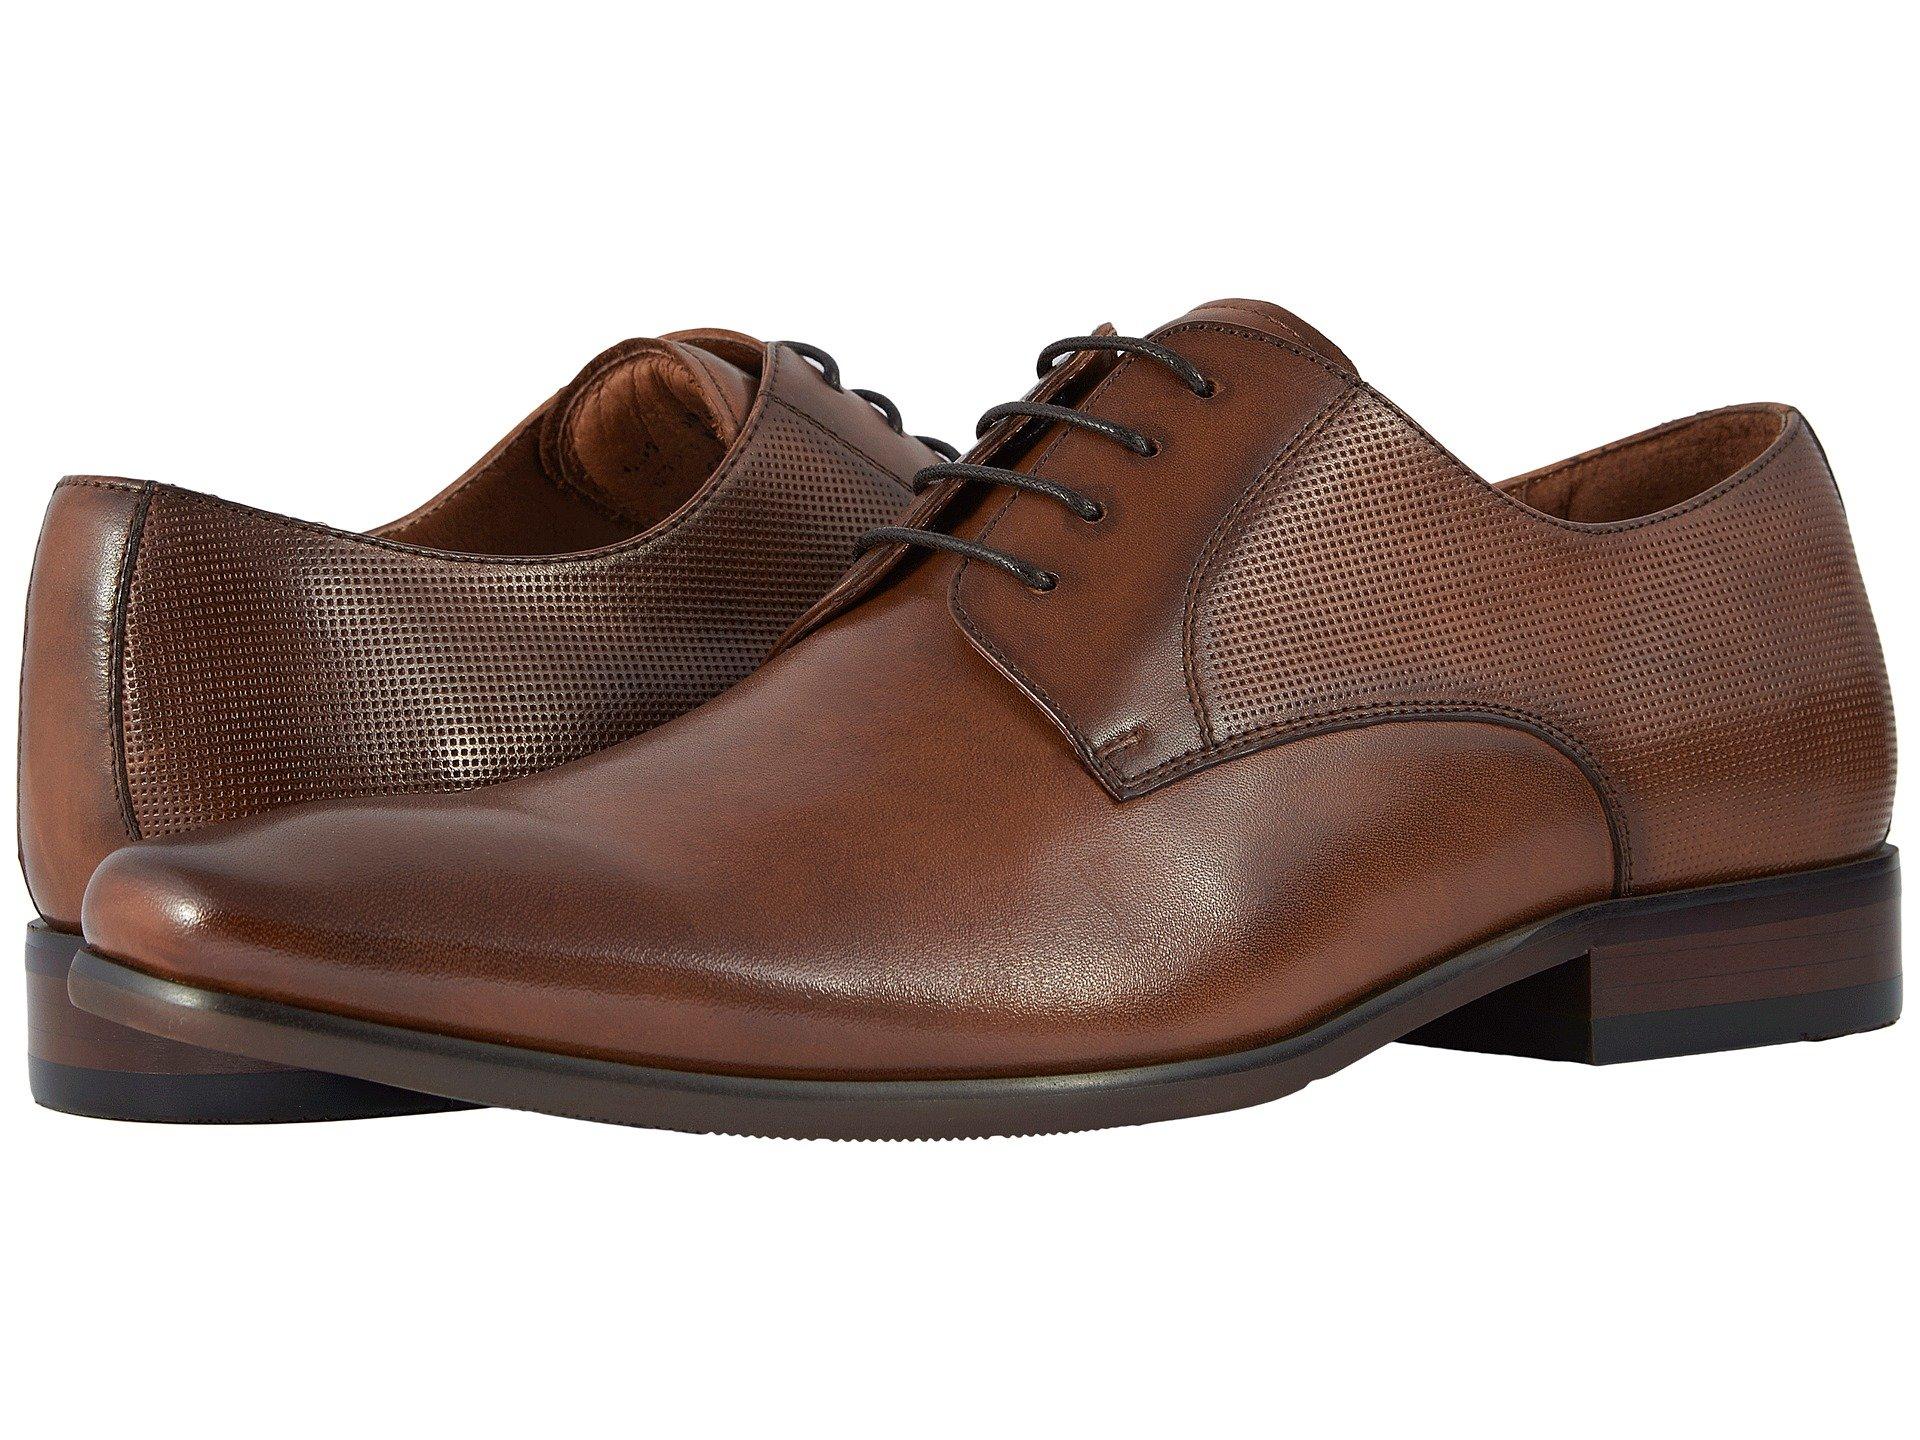 Florsheim Leather Postino Plain Toe Oxford in Brown for Men - Lyst